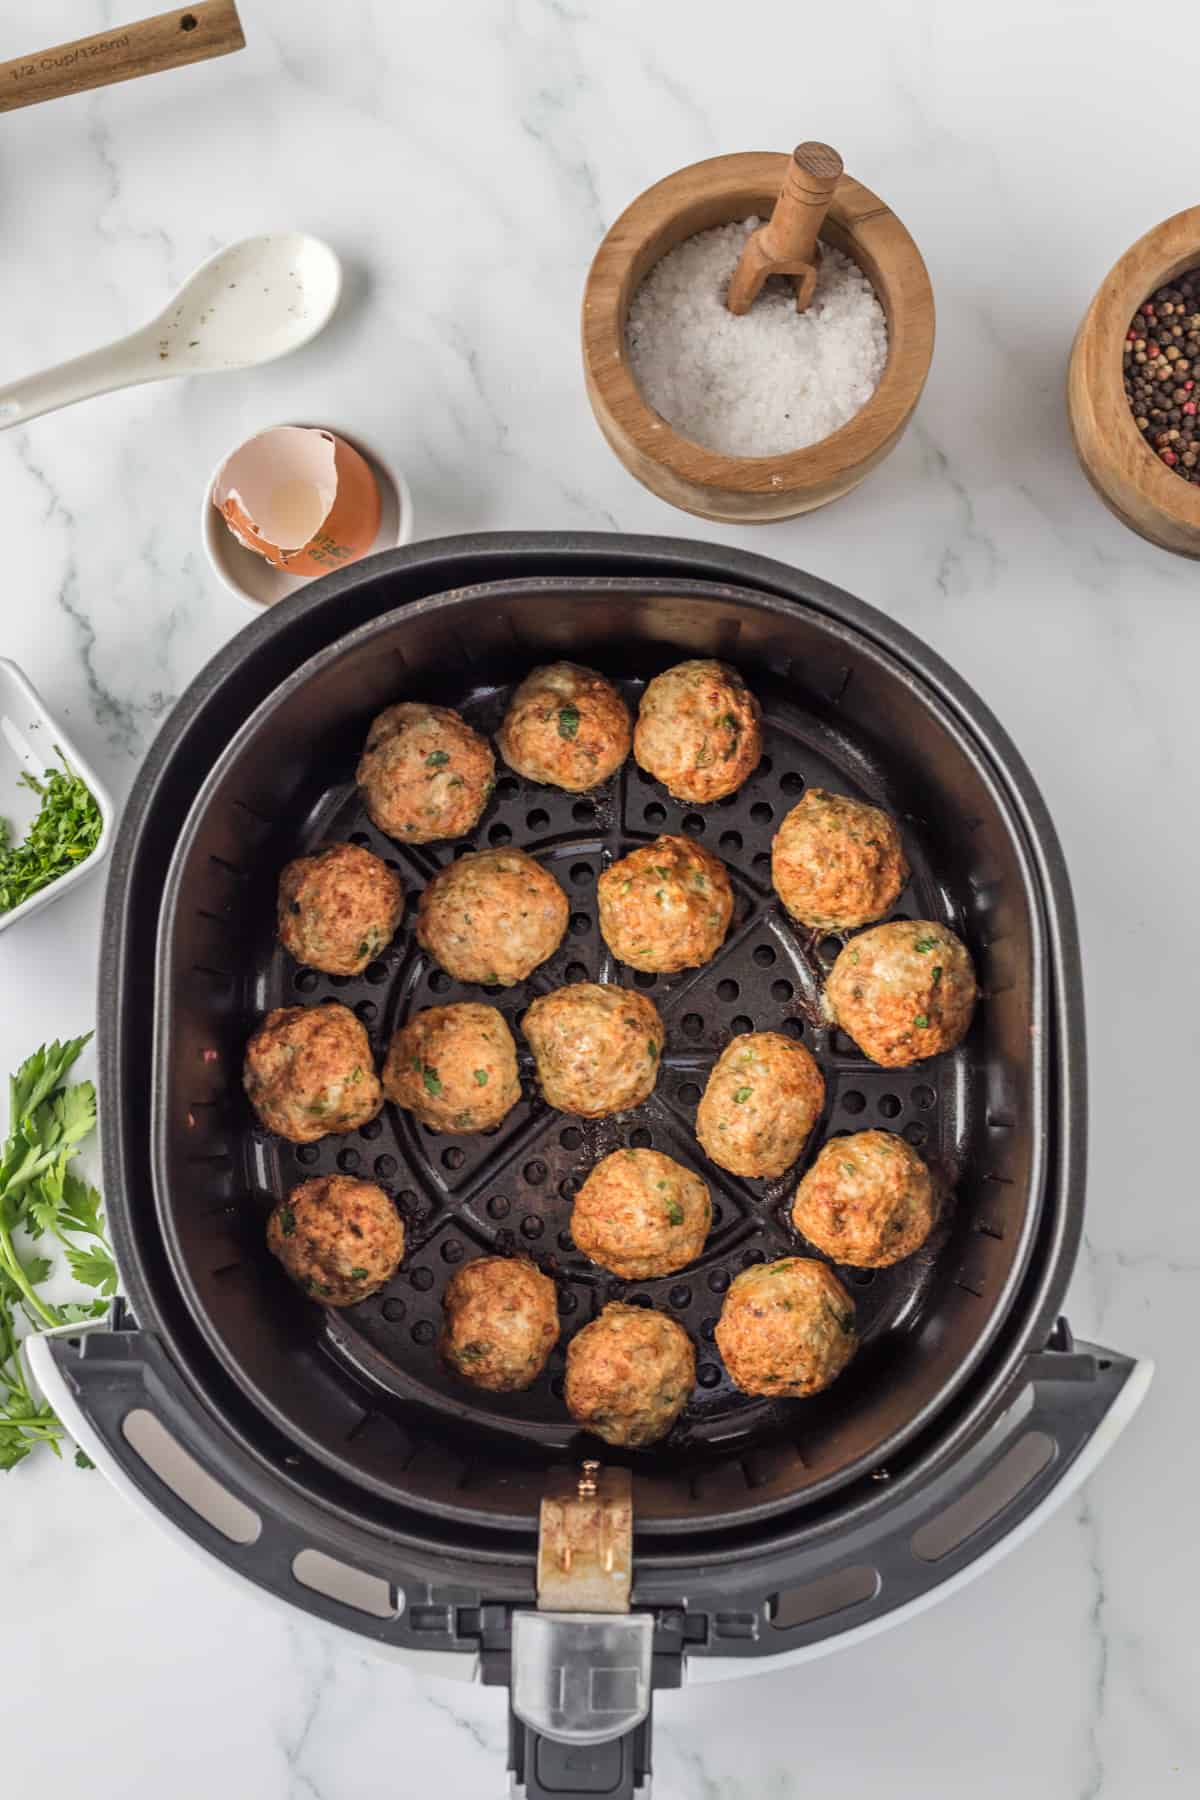 cooked meatballs in the basket of the air fryer